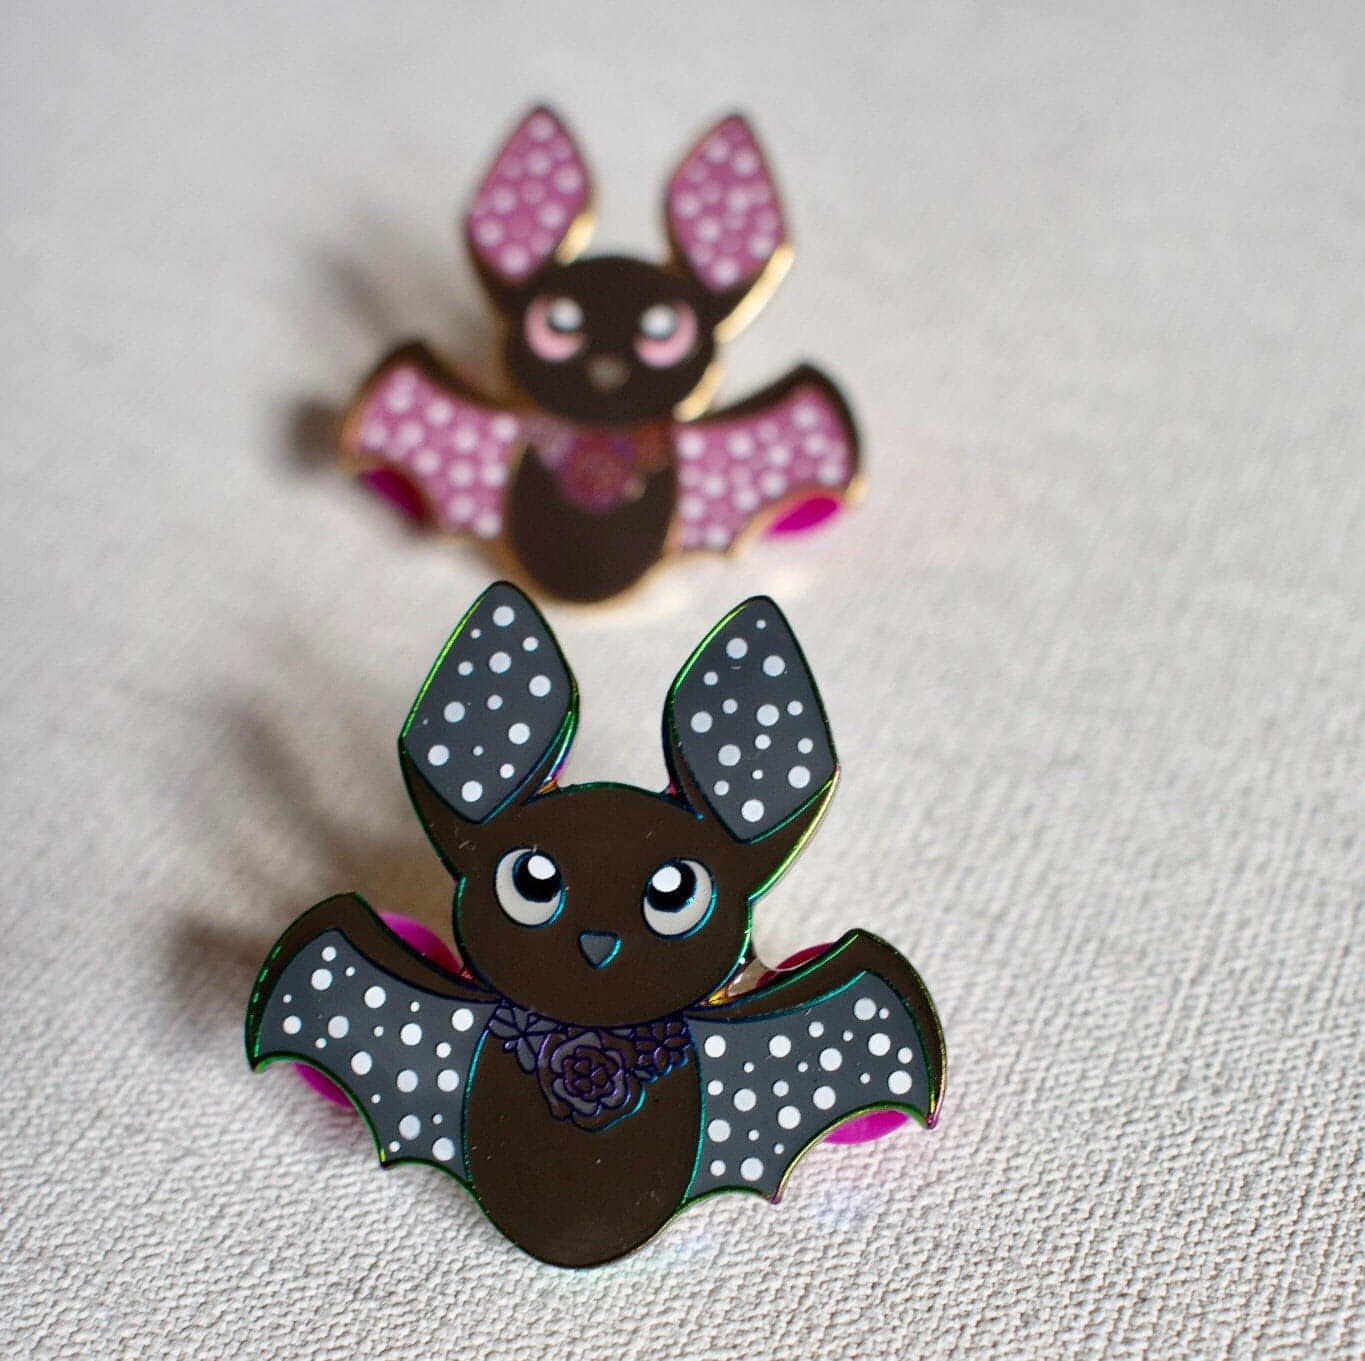 At the front of the image is the bat pin with rainbow metal plating. The bat is black with grey wings and white dots on its ears and wings. At the back of the image is the bat pin with purple ears and wings and a black body.